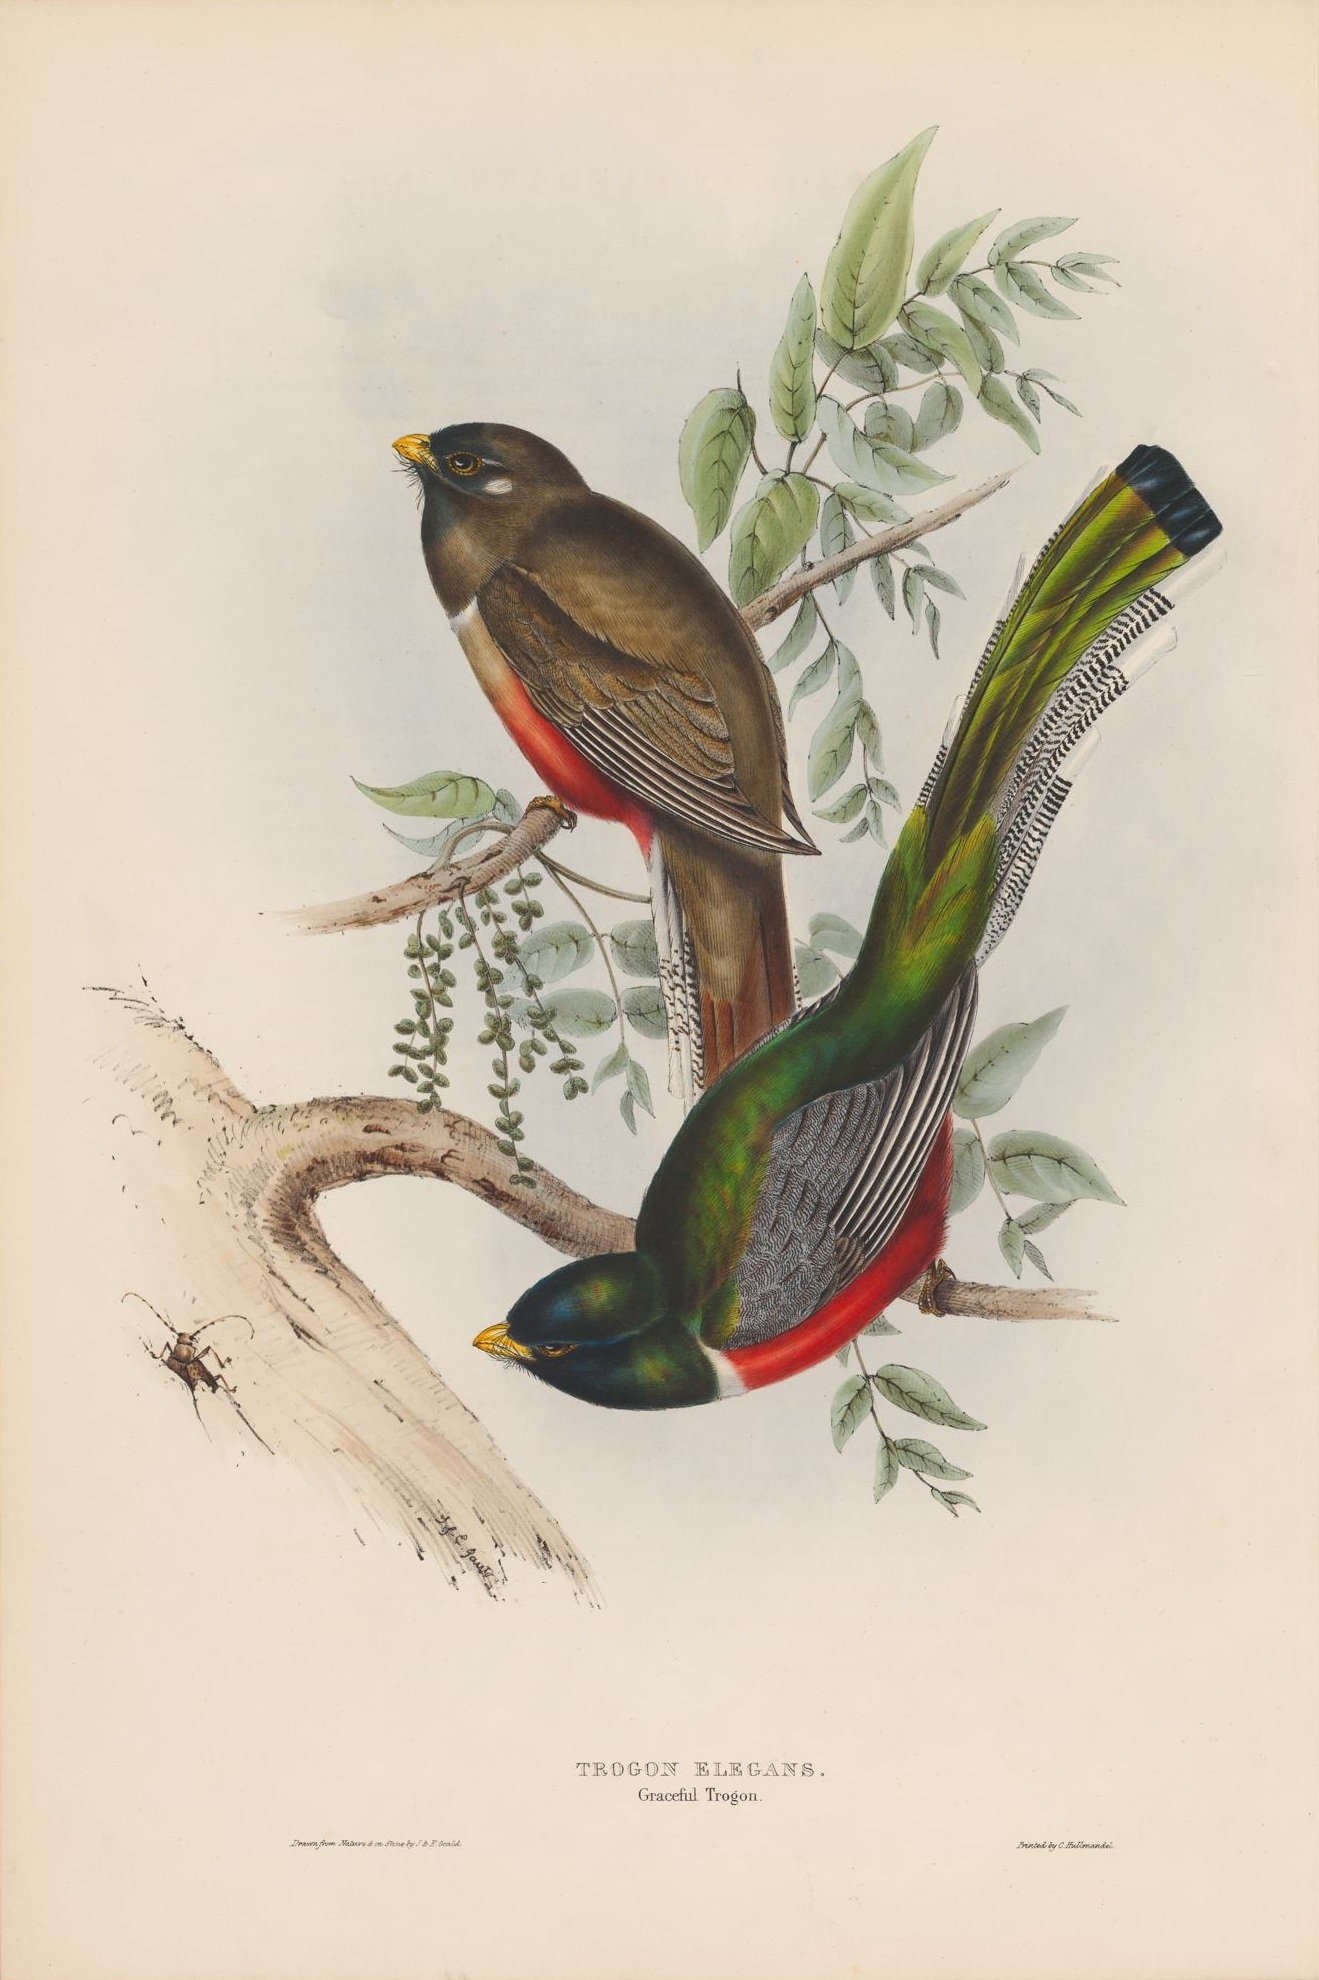 this drawing shows two red and green birds perched on nches